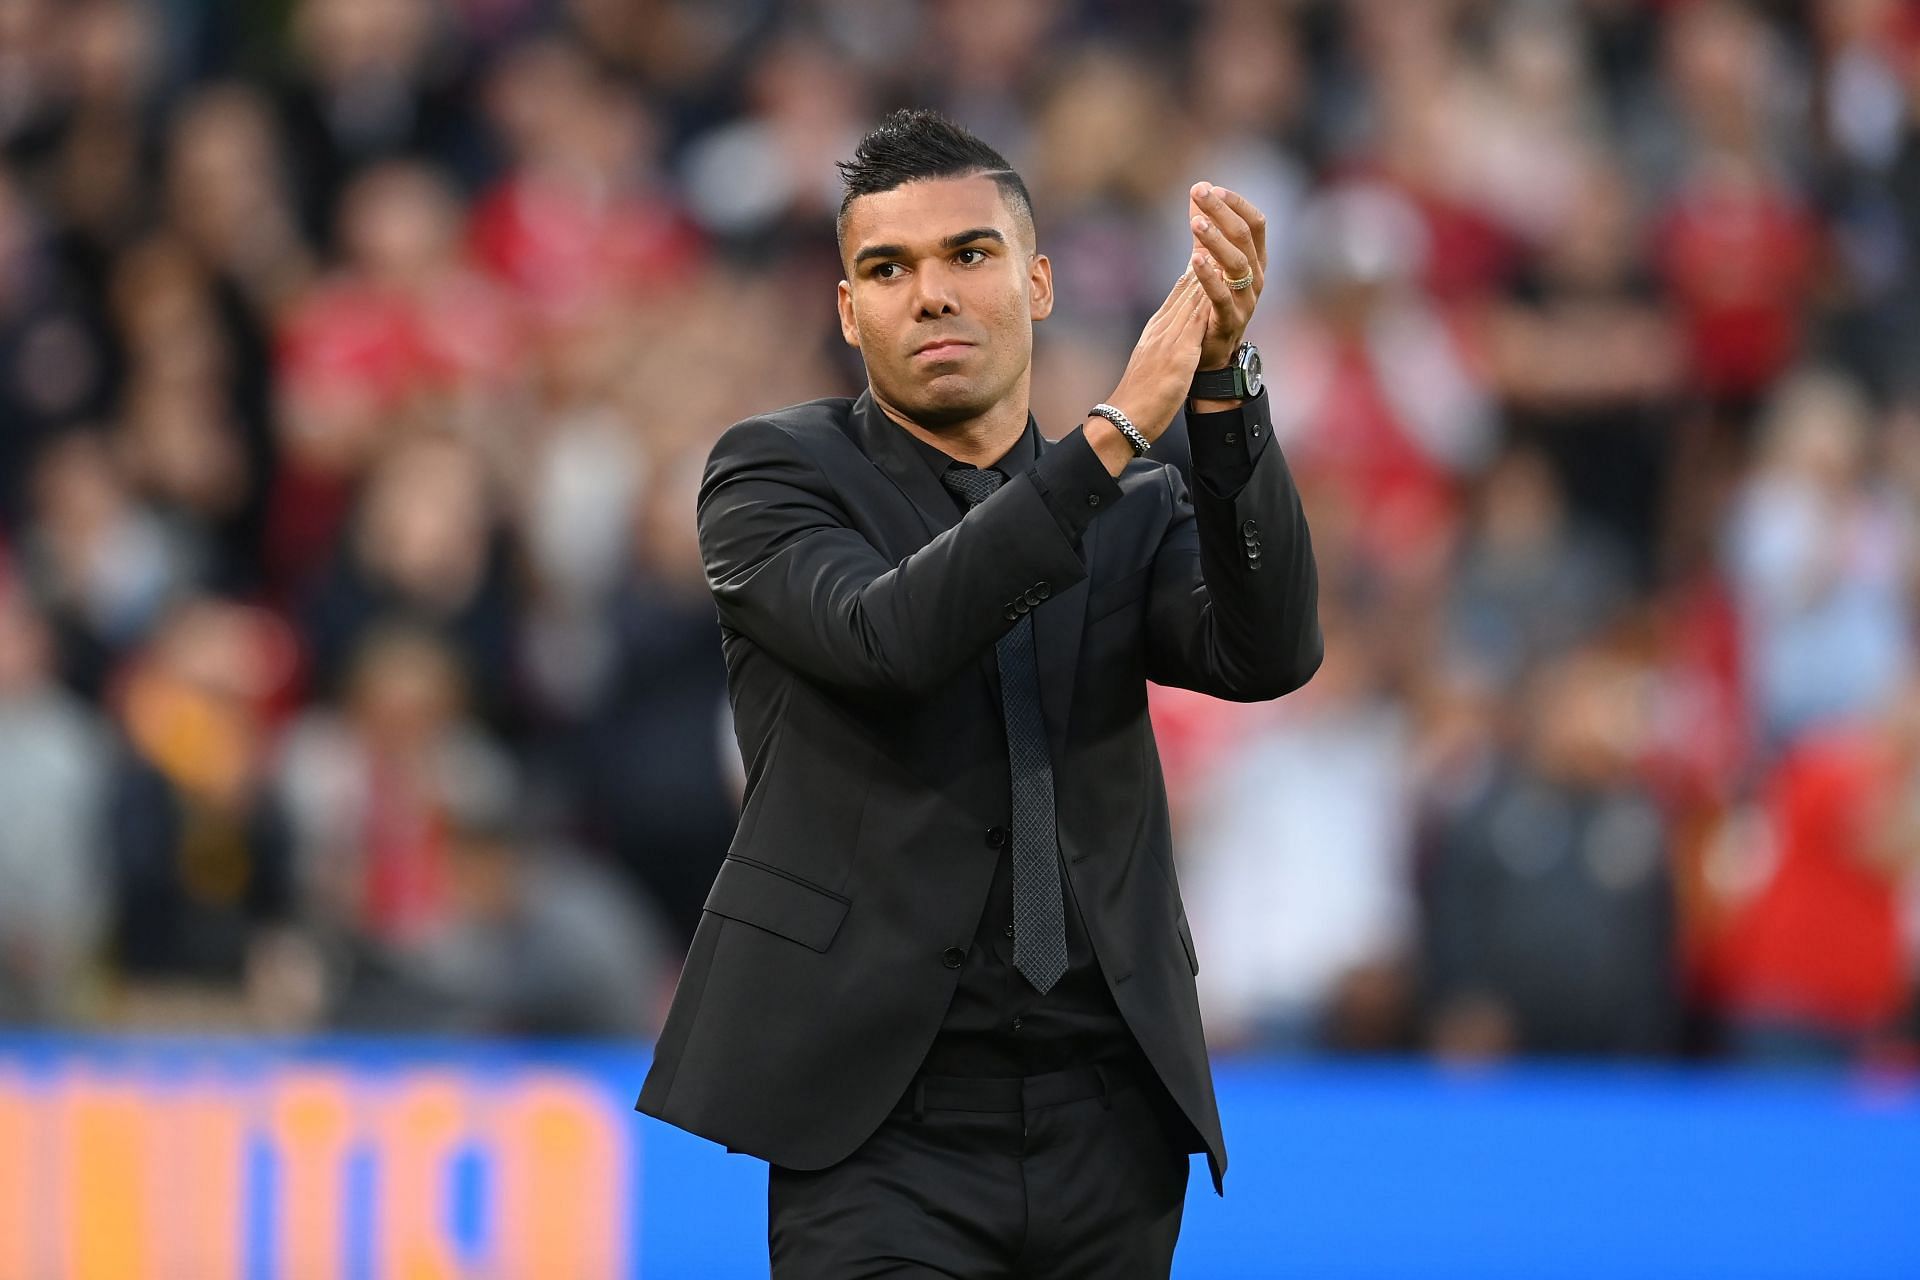 Casemiro is expected to become a mainstay in midfield at Old Trafford.